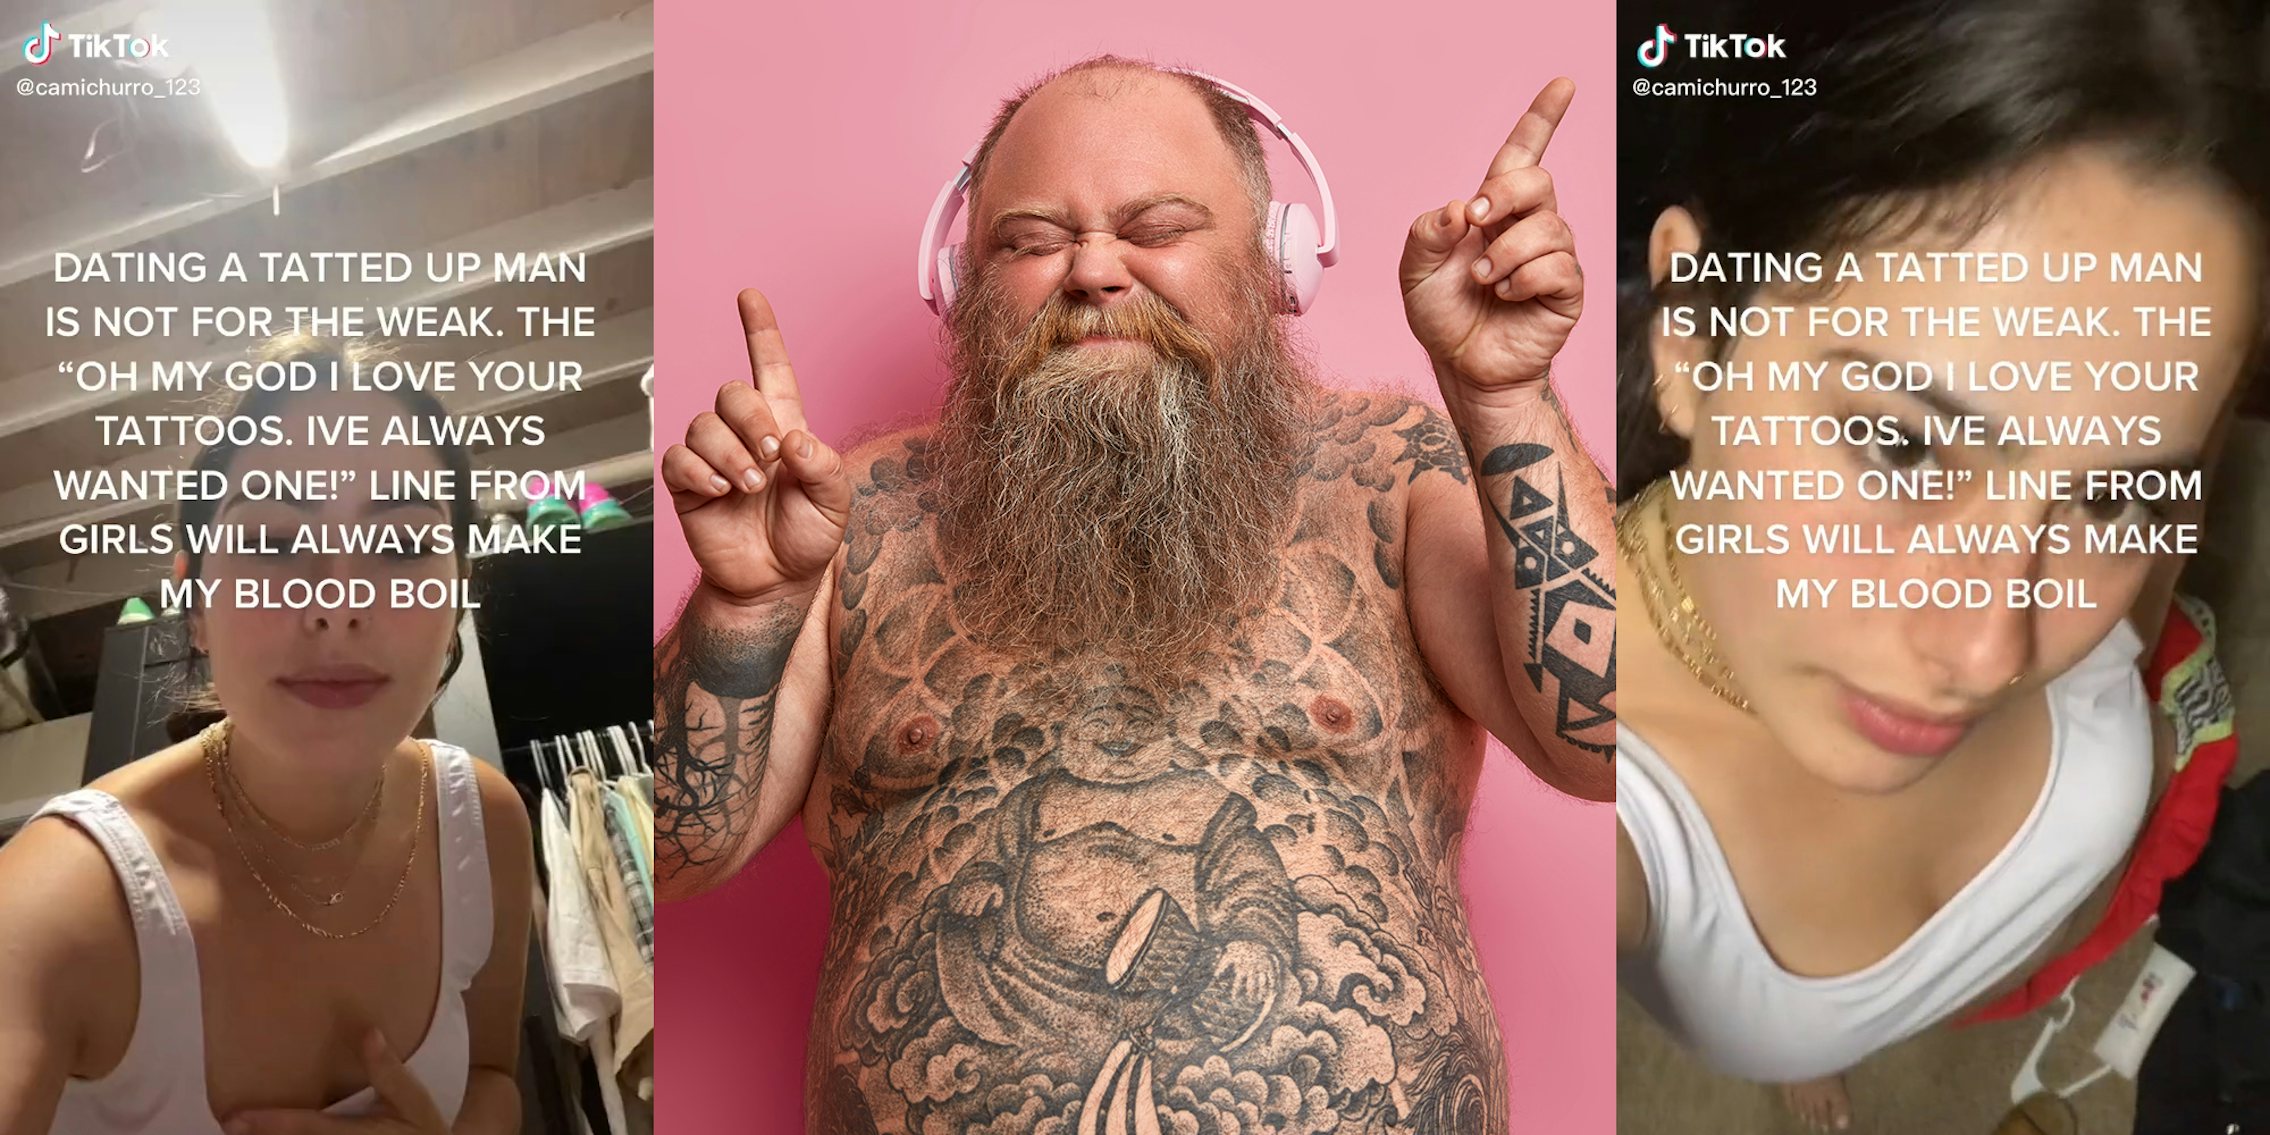 young woman with caption 'Dating a tatted up man is not for the weak. the 'oh my god i love your tattoos. i've always wanted one!' line from girls will always make my blood boil' (l&r) shirtless bearded man covered in tattoos dances to music in pink headphones (c)